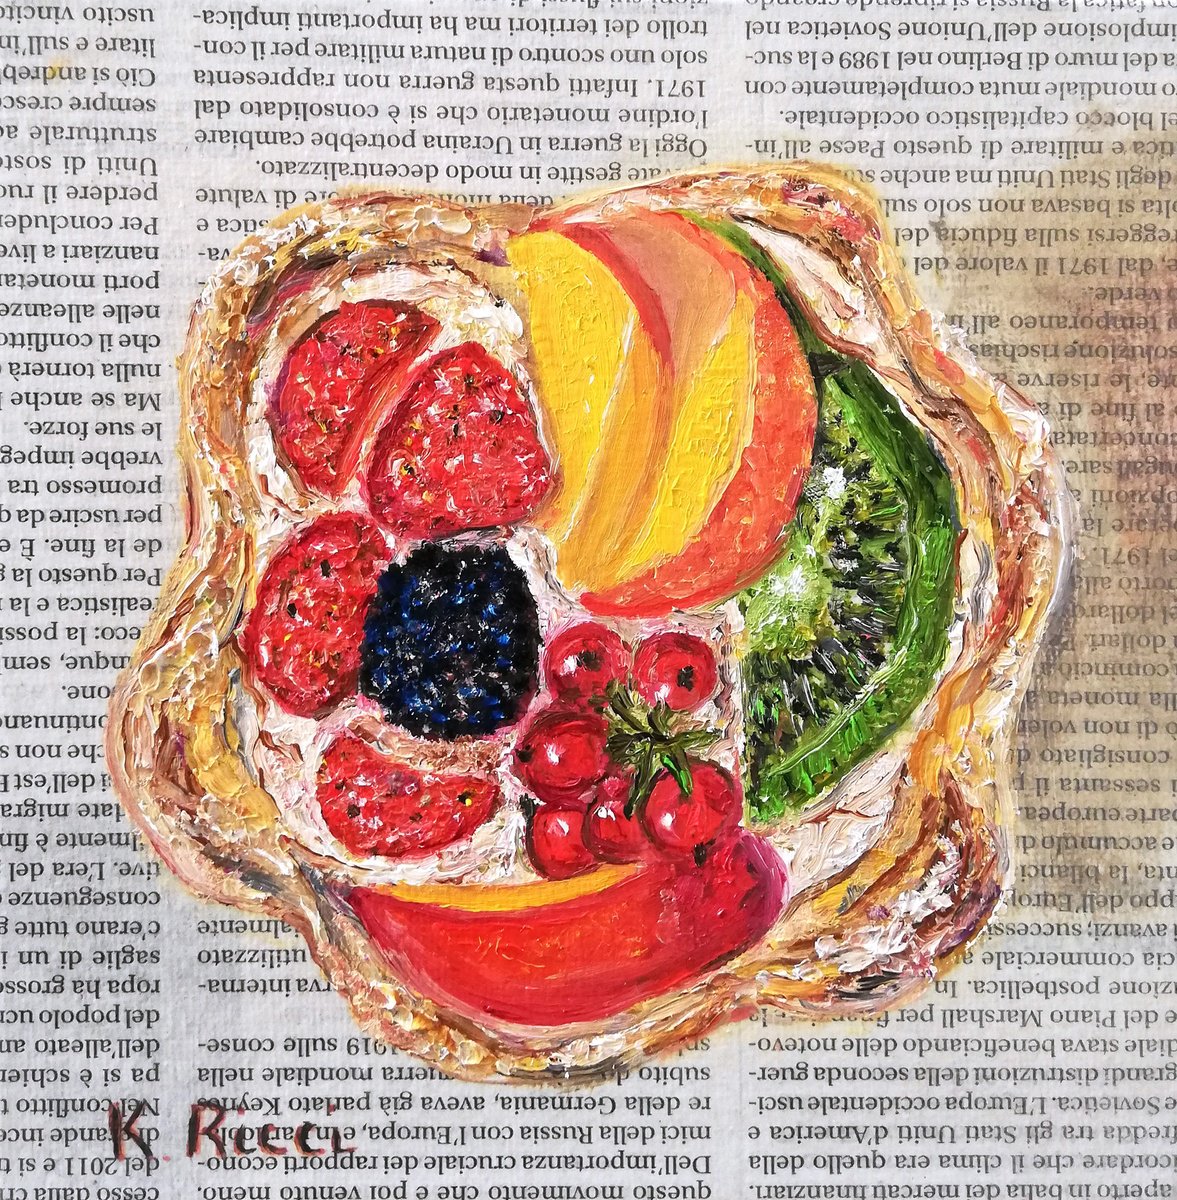 Fruit Tart on Newspaper Original Oil on Canvas Board Painting 6 by 6 inches (15x15 cm) by Katia Ricci